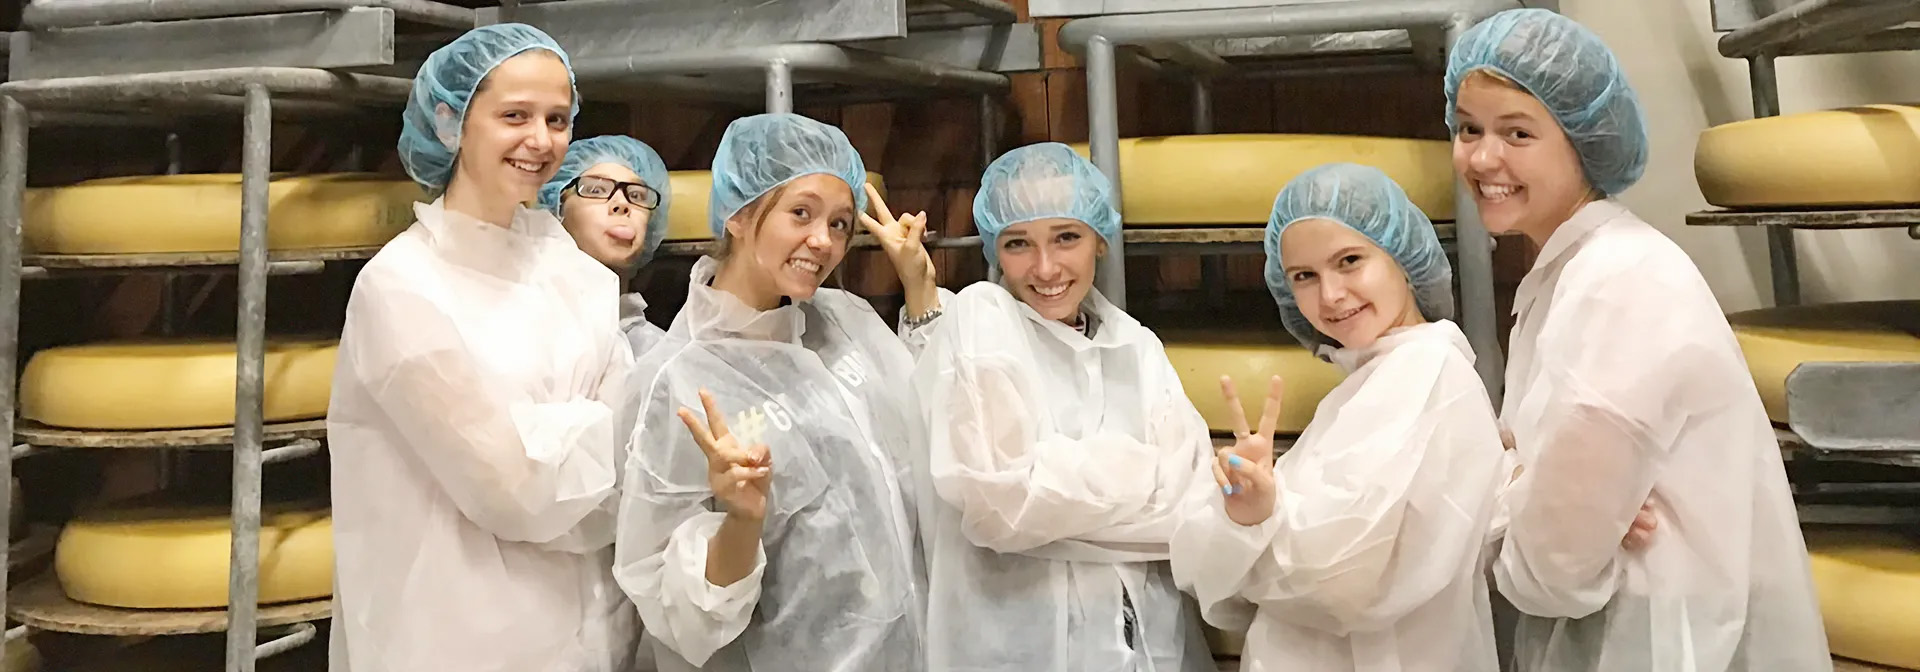 Cheese factory: Excursion with a guide to one of the numerous cheese dairies in the Allgäu. This is an example on how the students learn outside of class.